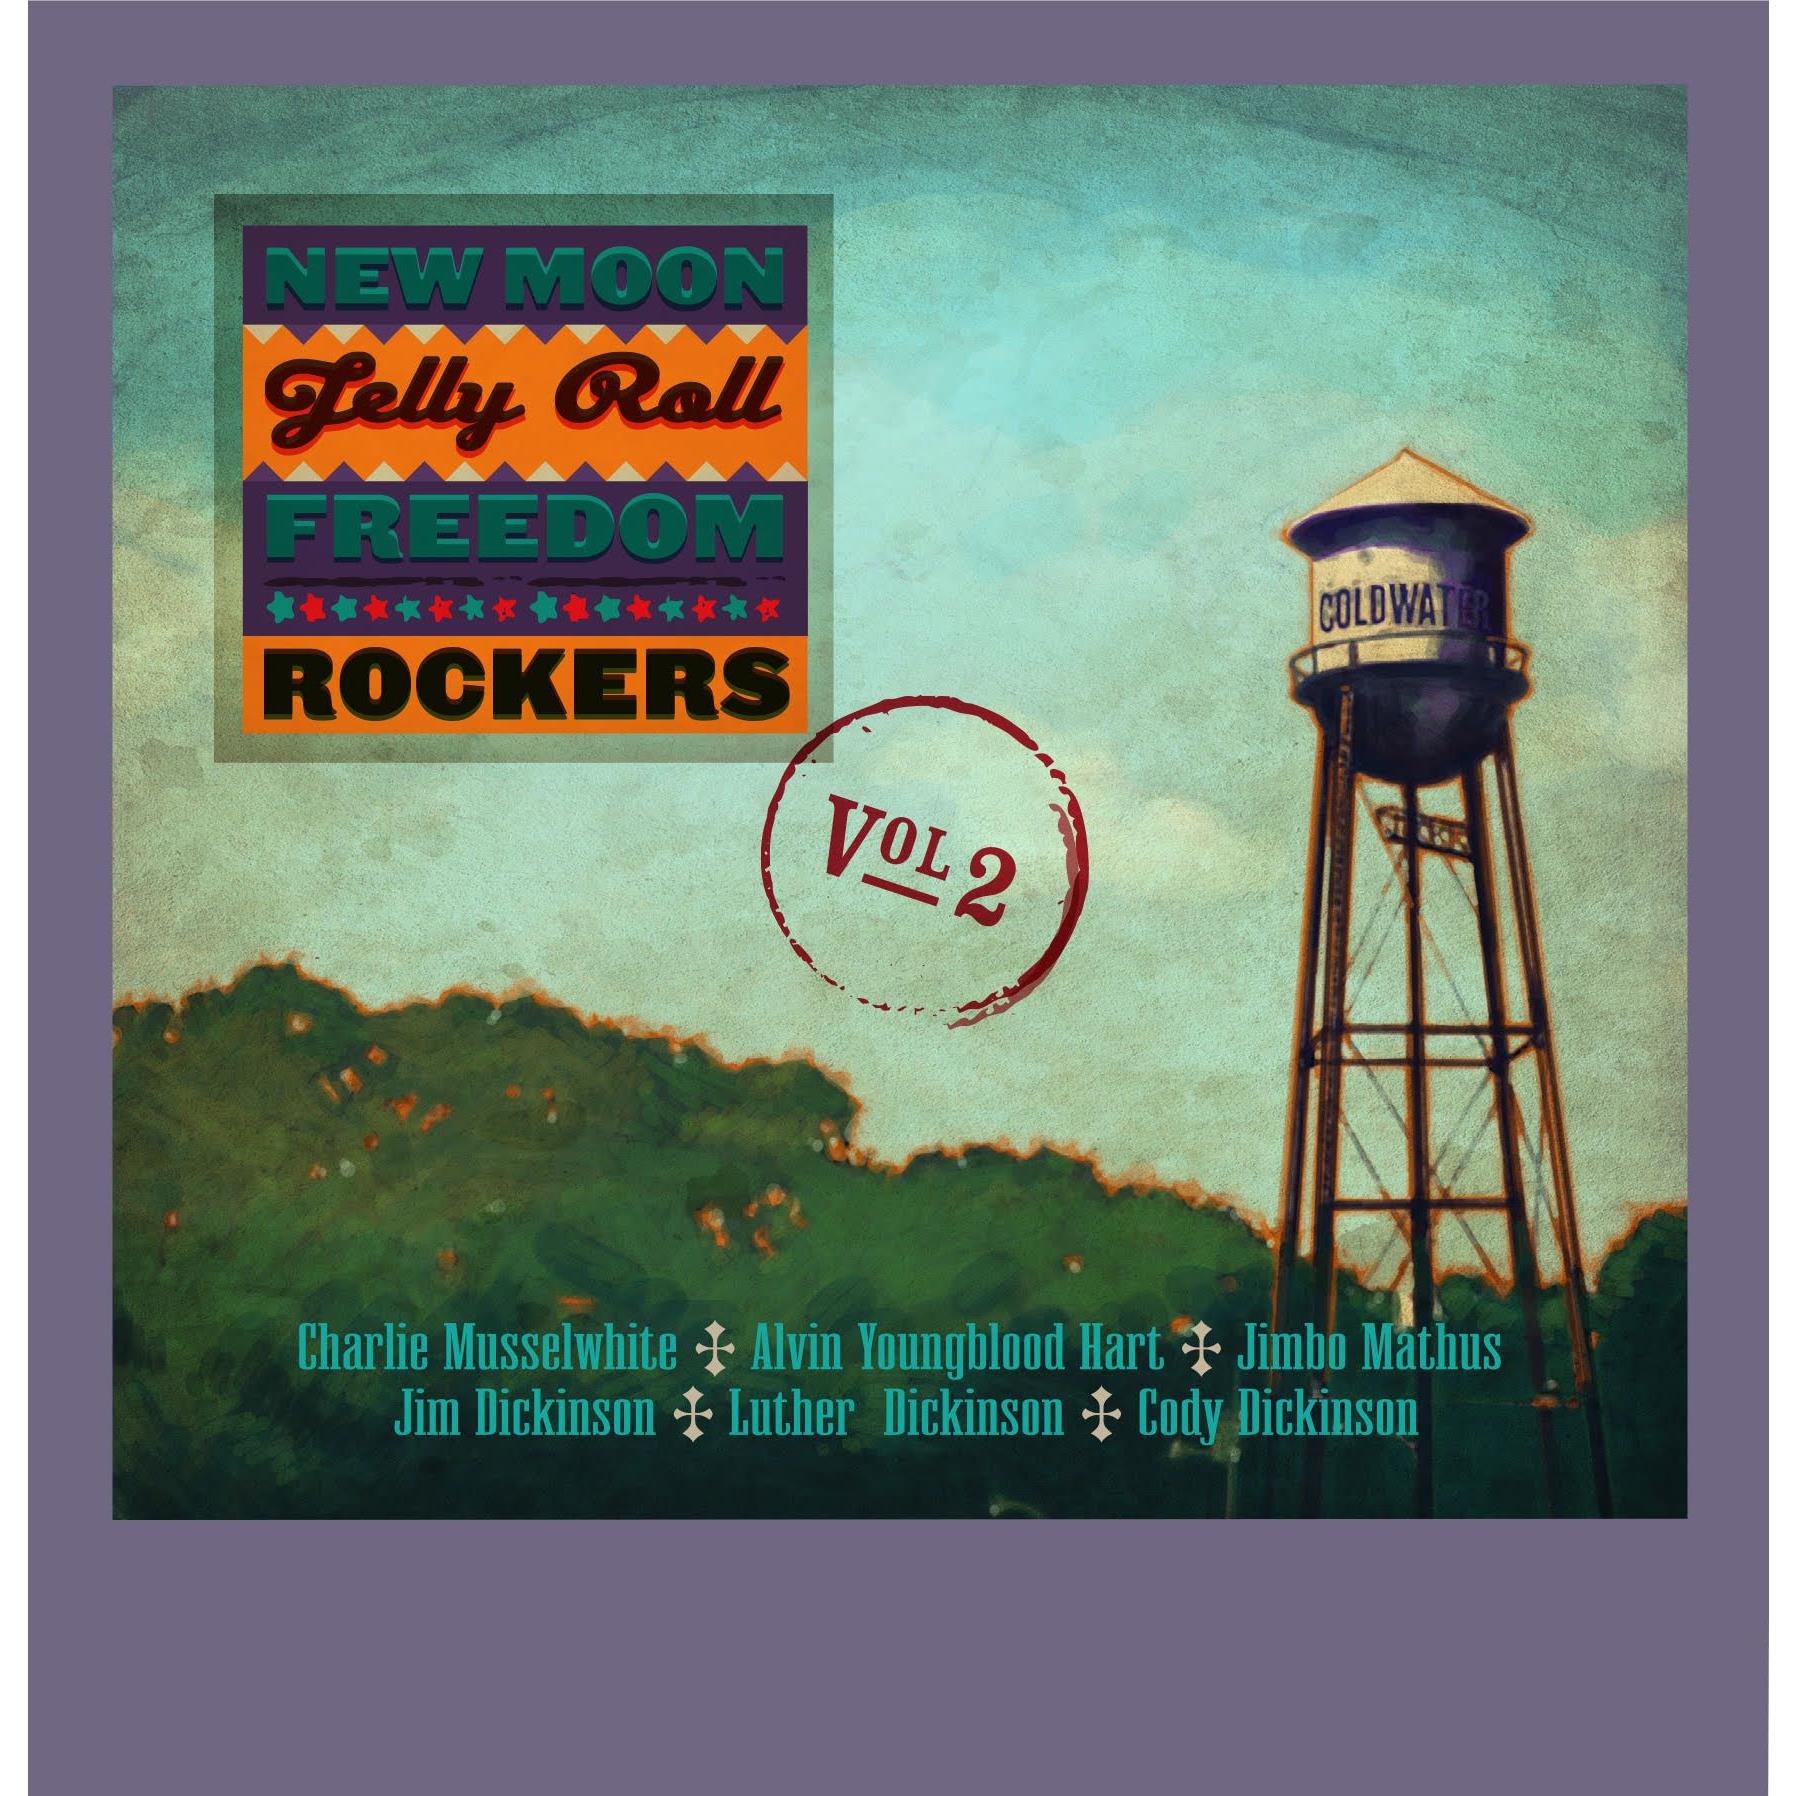 new moon jelly roll freedom rockers volume 2